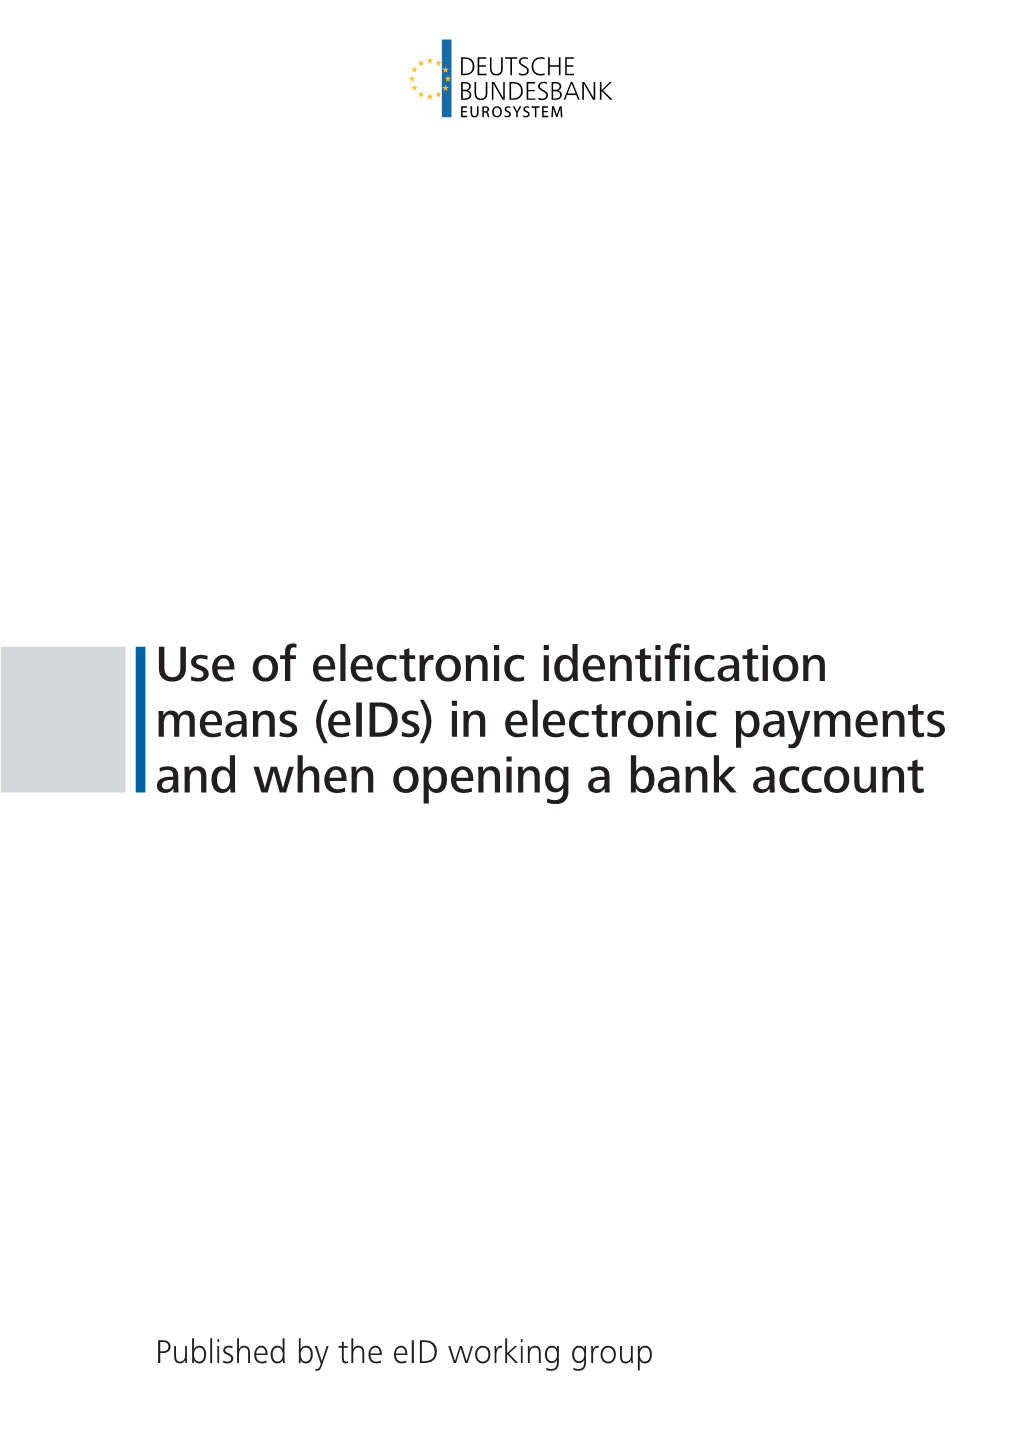 Use of Electronic Identification Means (Eids) in Electronic Payments and When Opening a Bank Account